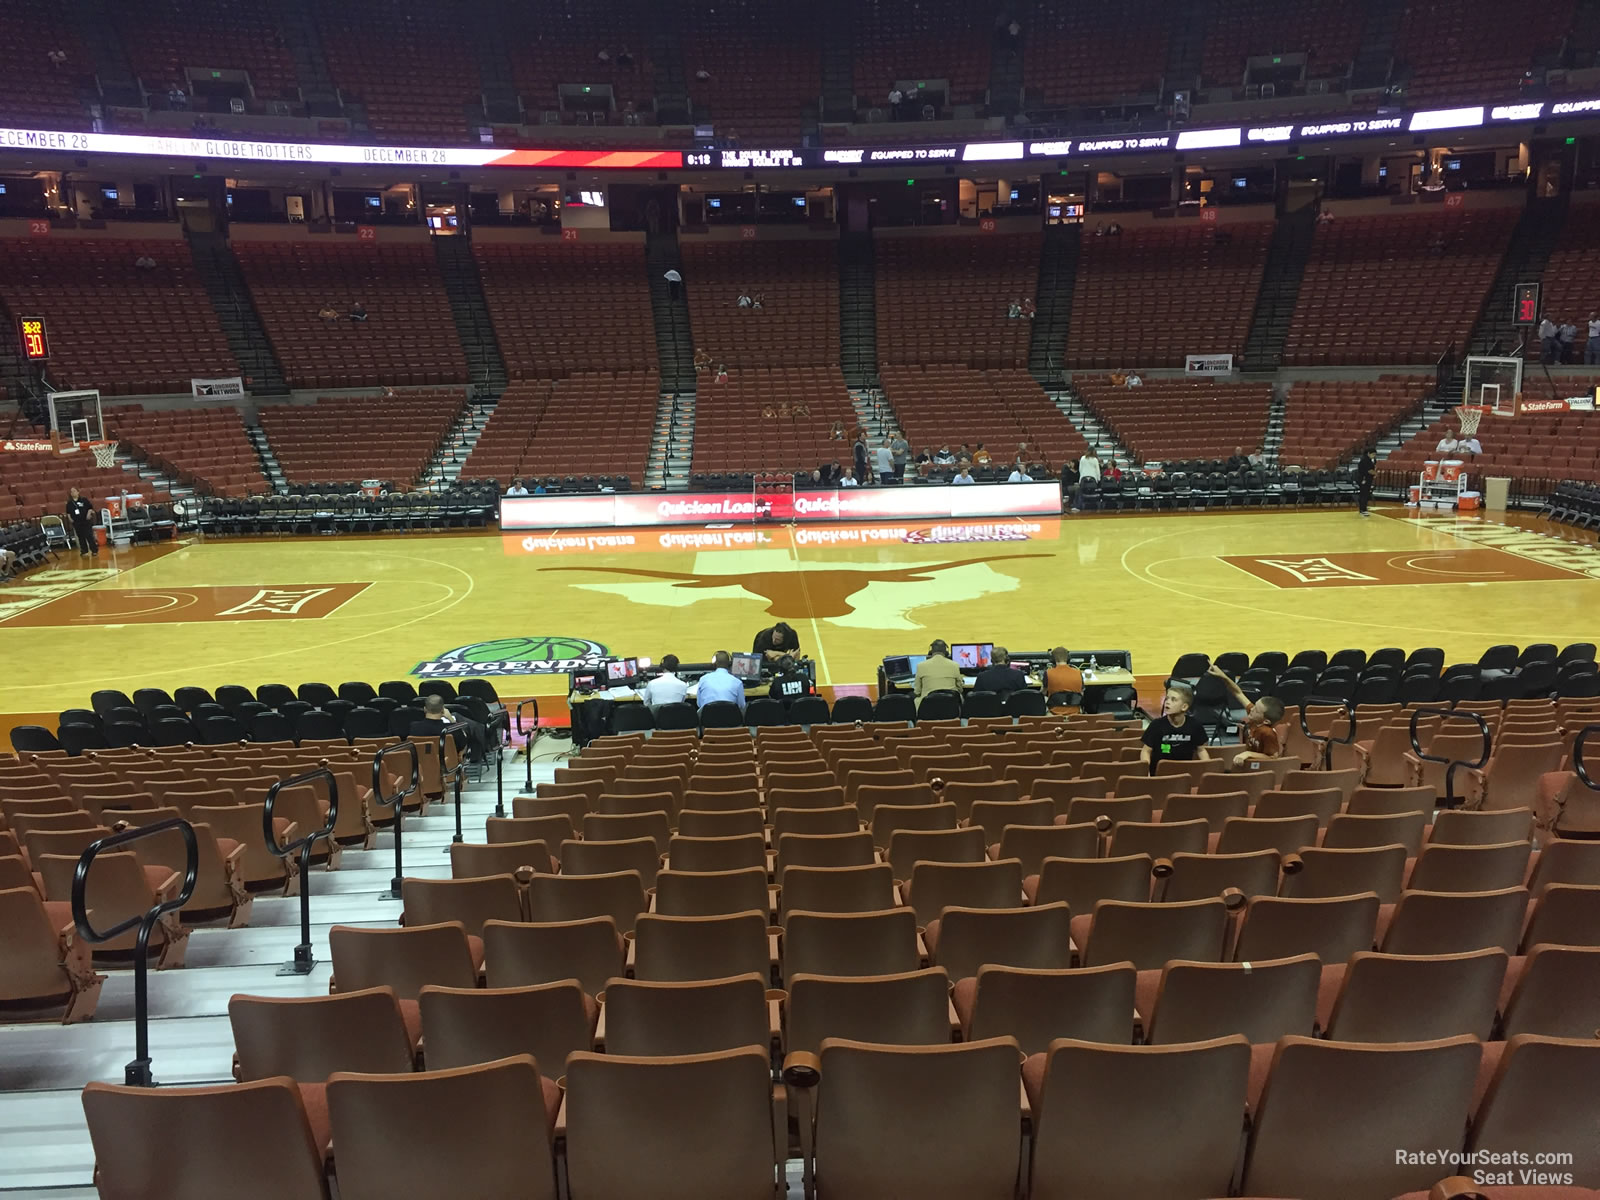 Frank Erwin Center Seating Chart With Row Numbers